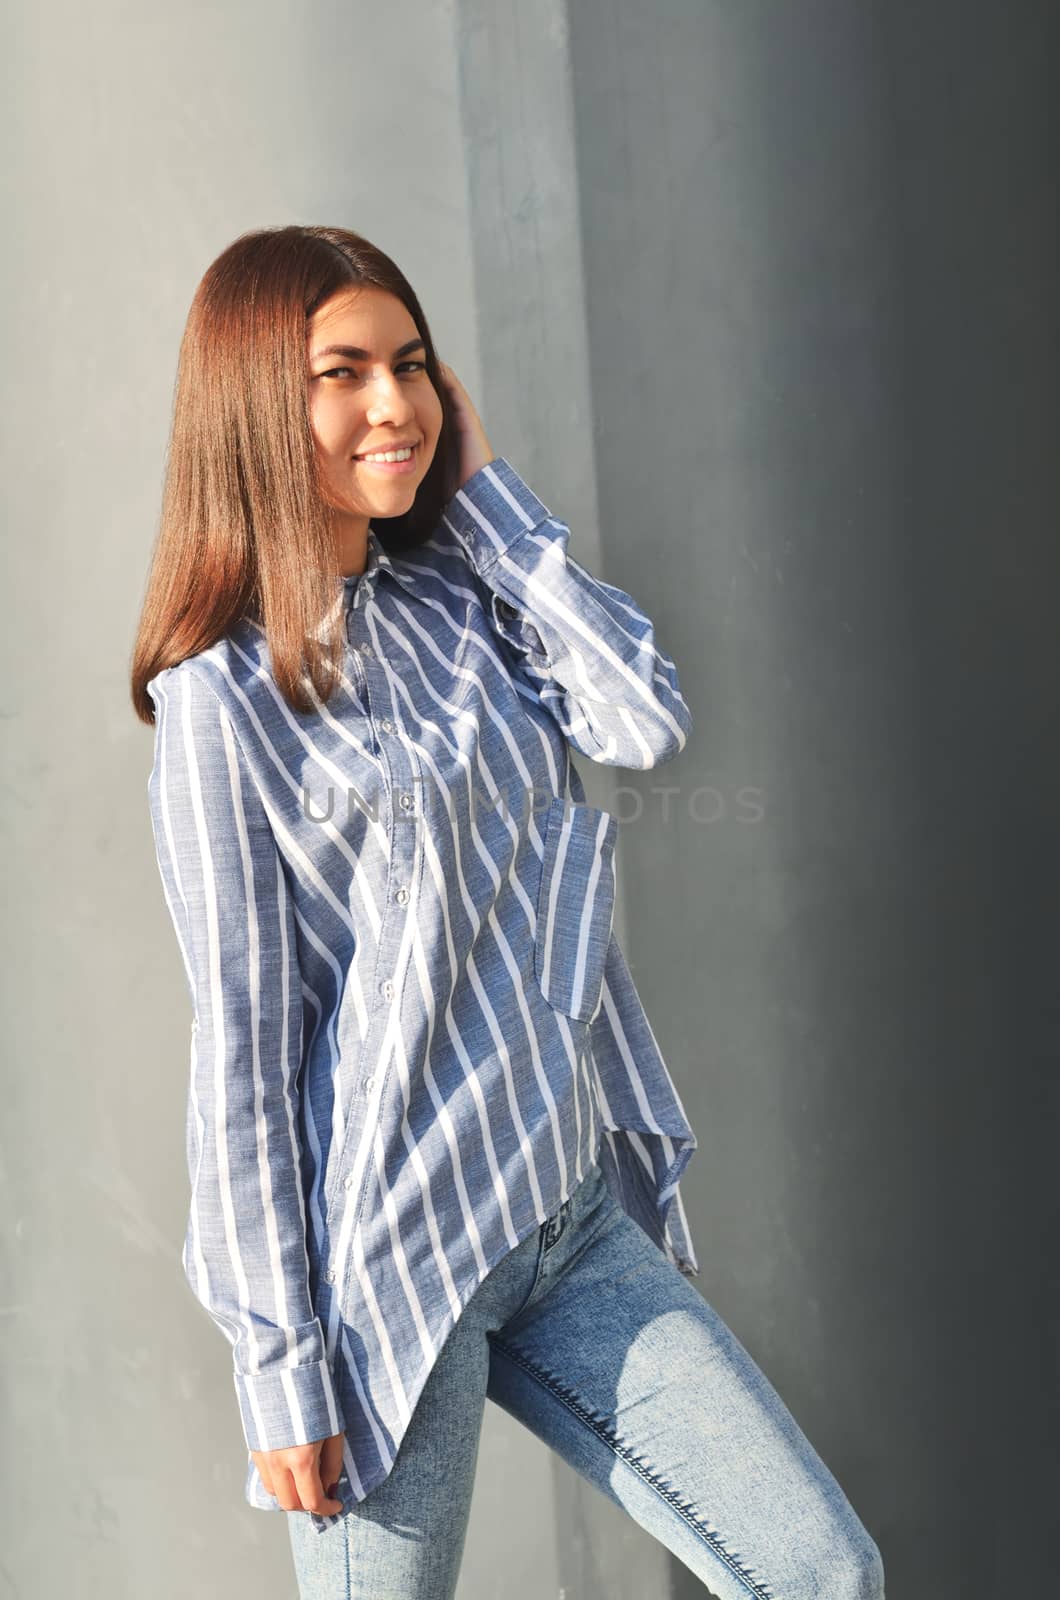 Young beautiful asian girl stands near the wall and posing and she dressed a striped shirt